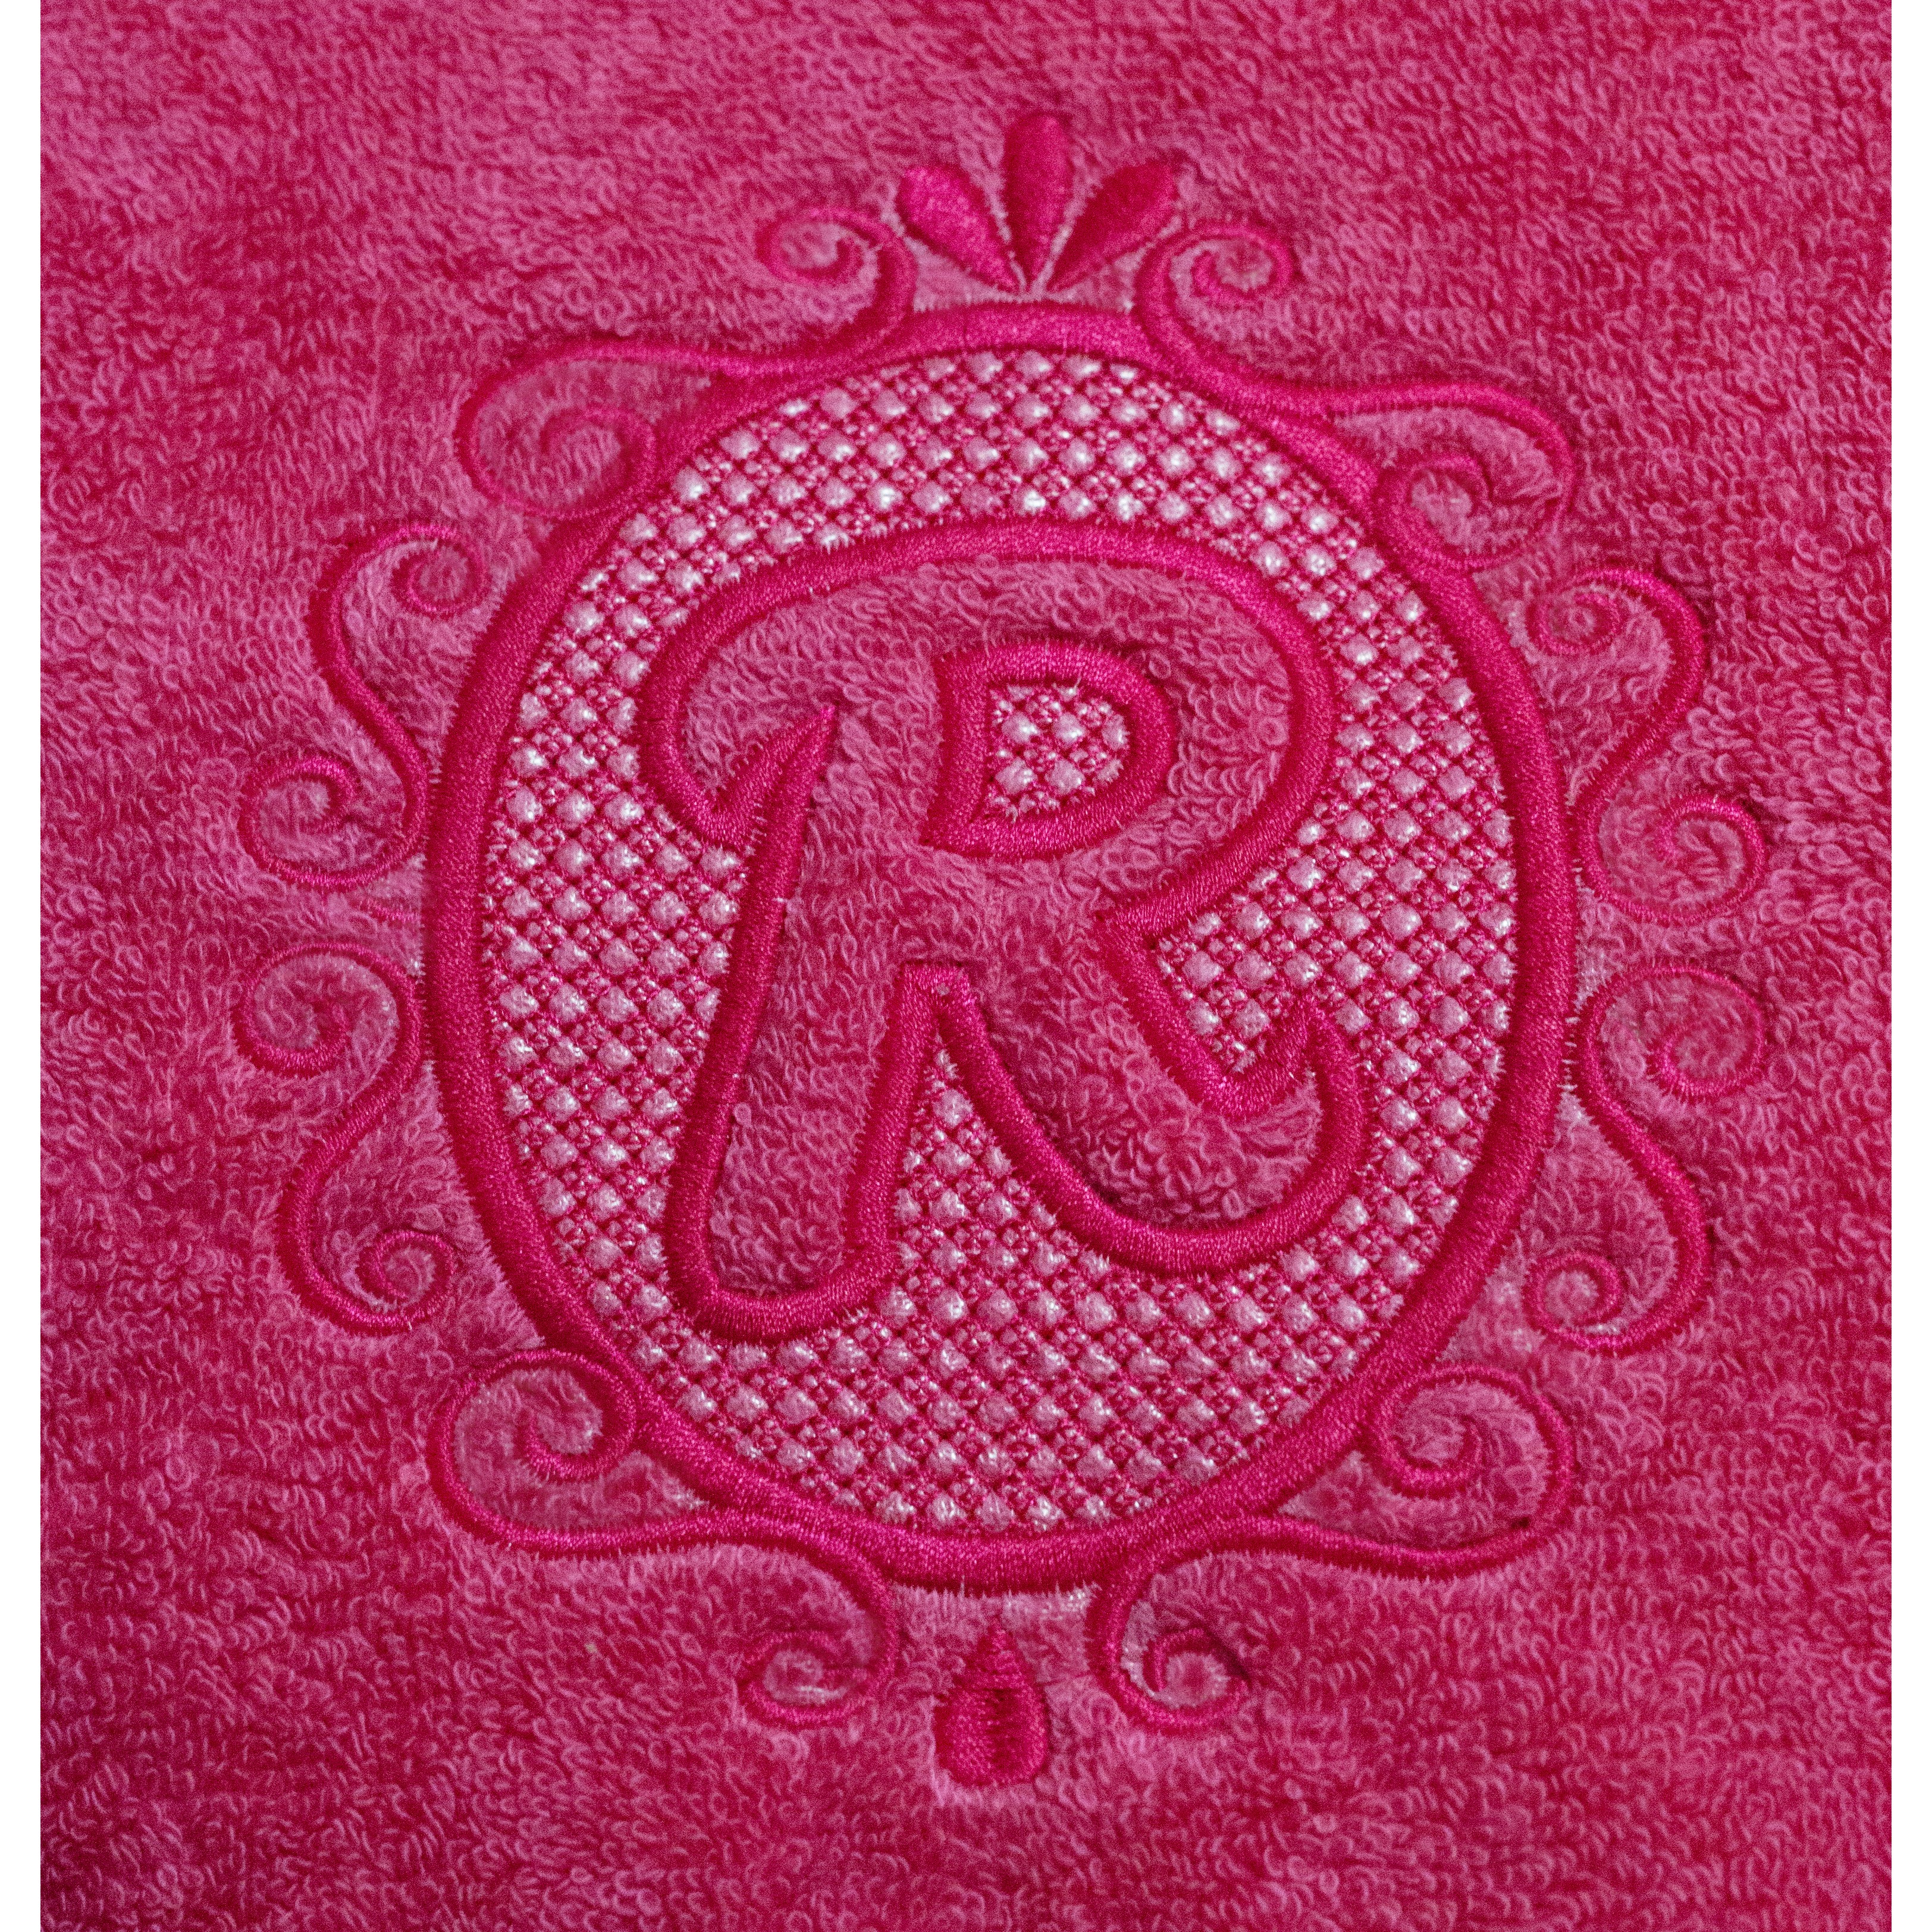 Oval Embossed Monogram Embroidery Designs